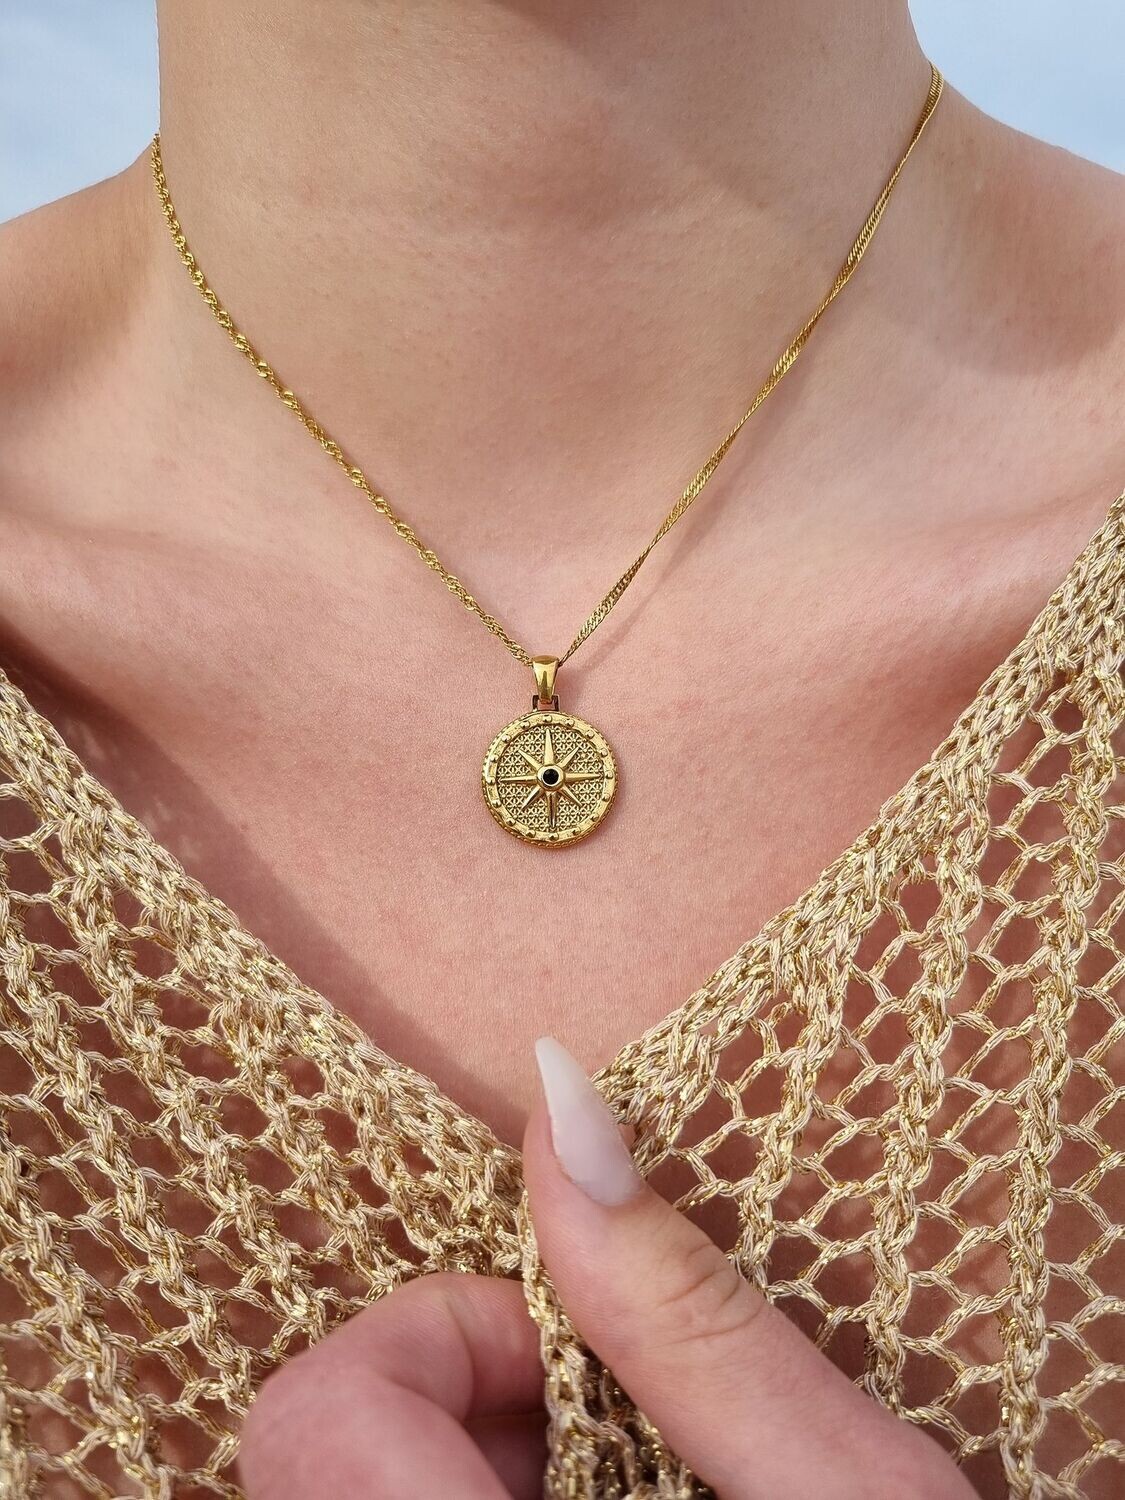 Gold North Star Necklace - Tomfoolery London